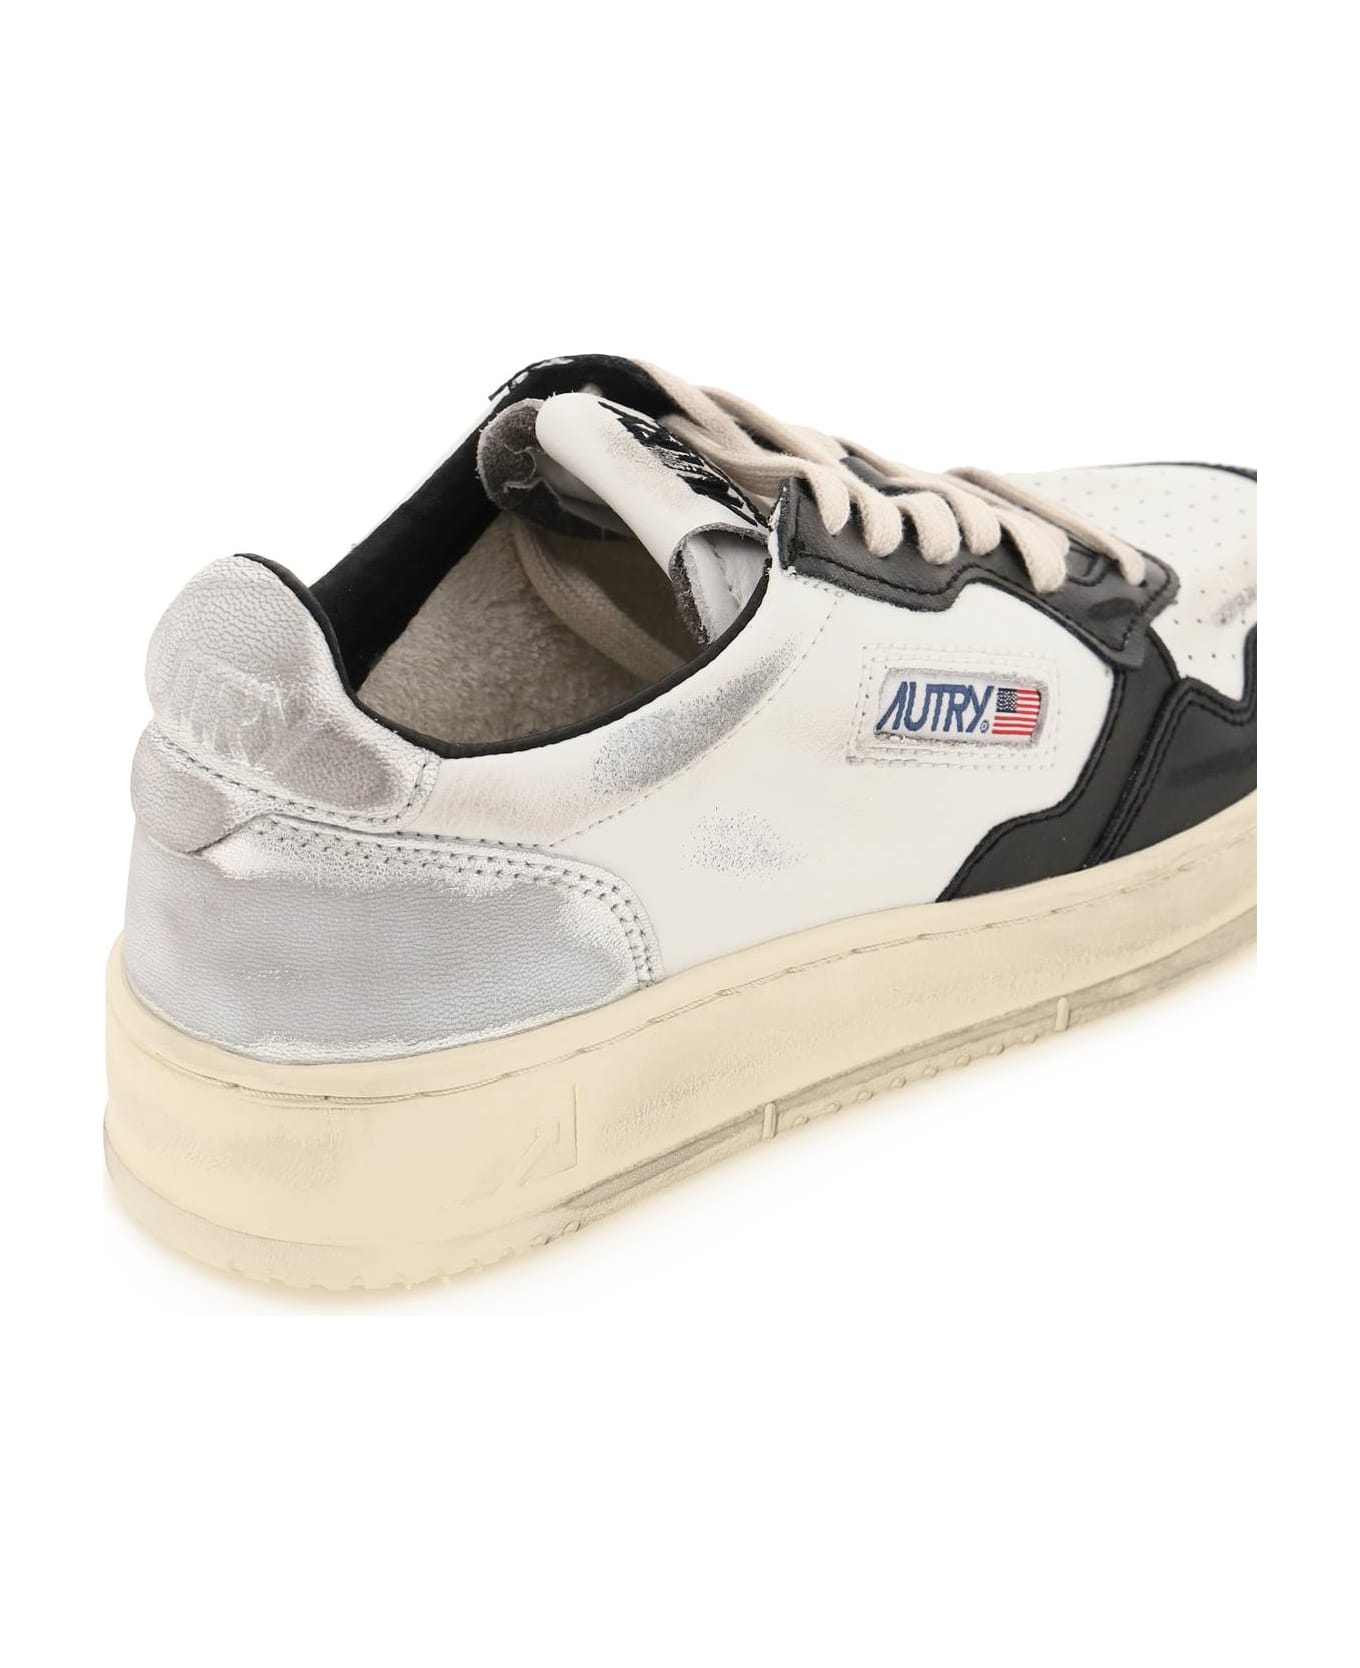 Autry 'medalist Low Super Vintage' Sneakers - Silver スニーカー